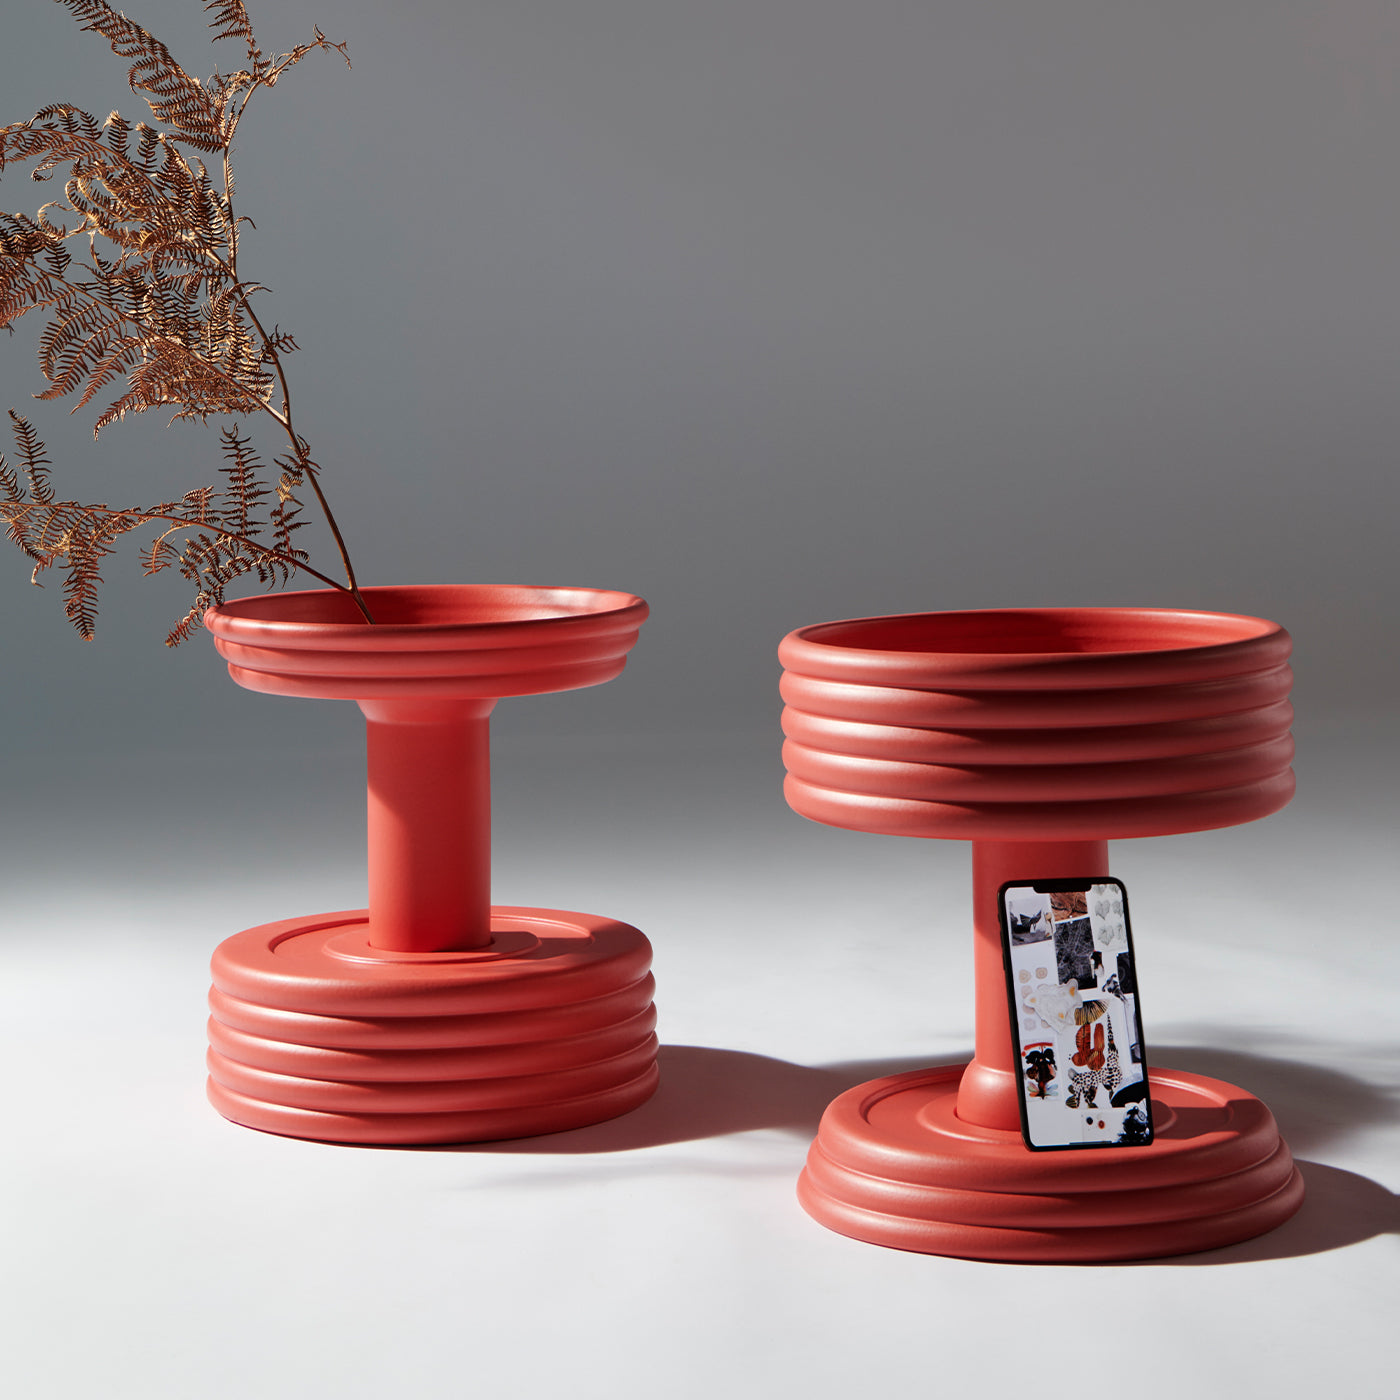 Triplex A Red Ceramic Centerpiece Limited Edition by Andrea Branciforti - Alternative view 1